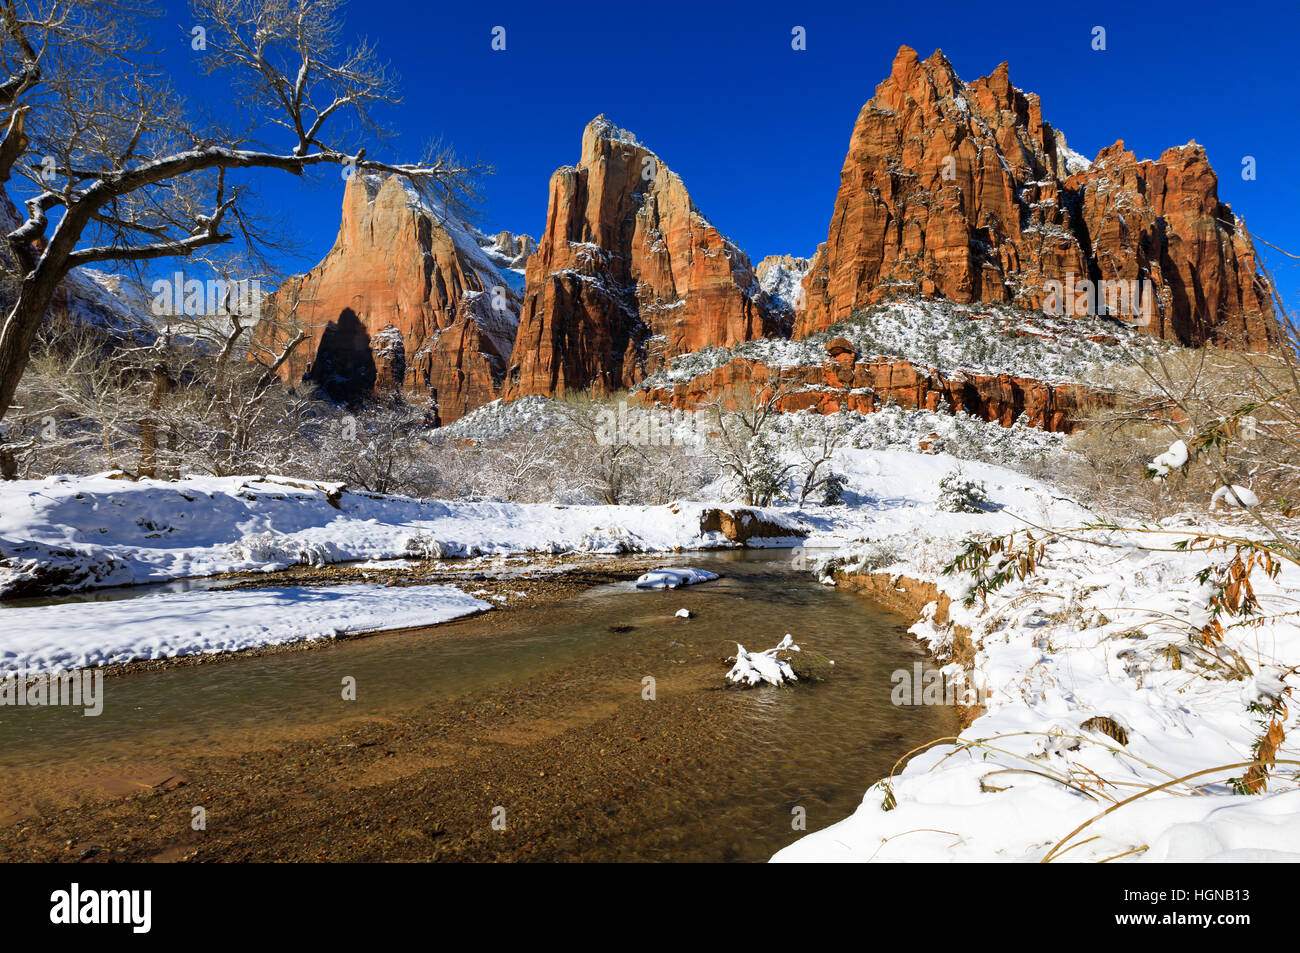 The Court of the Patriarchs at Zion National Park, Utah, USA  with the North Fork of the Virgin River in the foreground Stock Photo